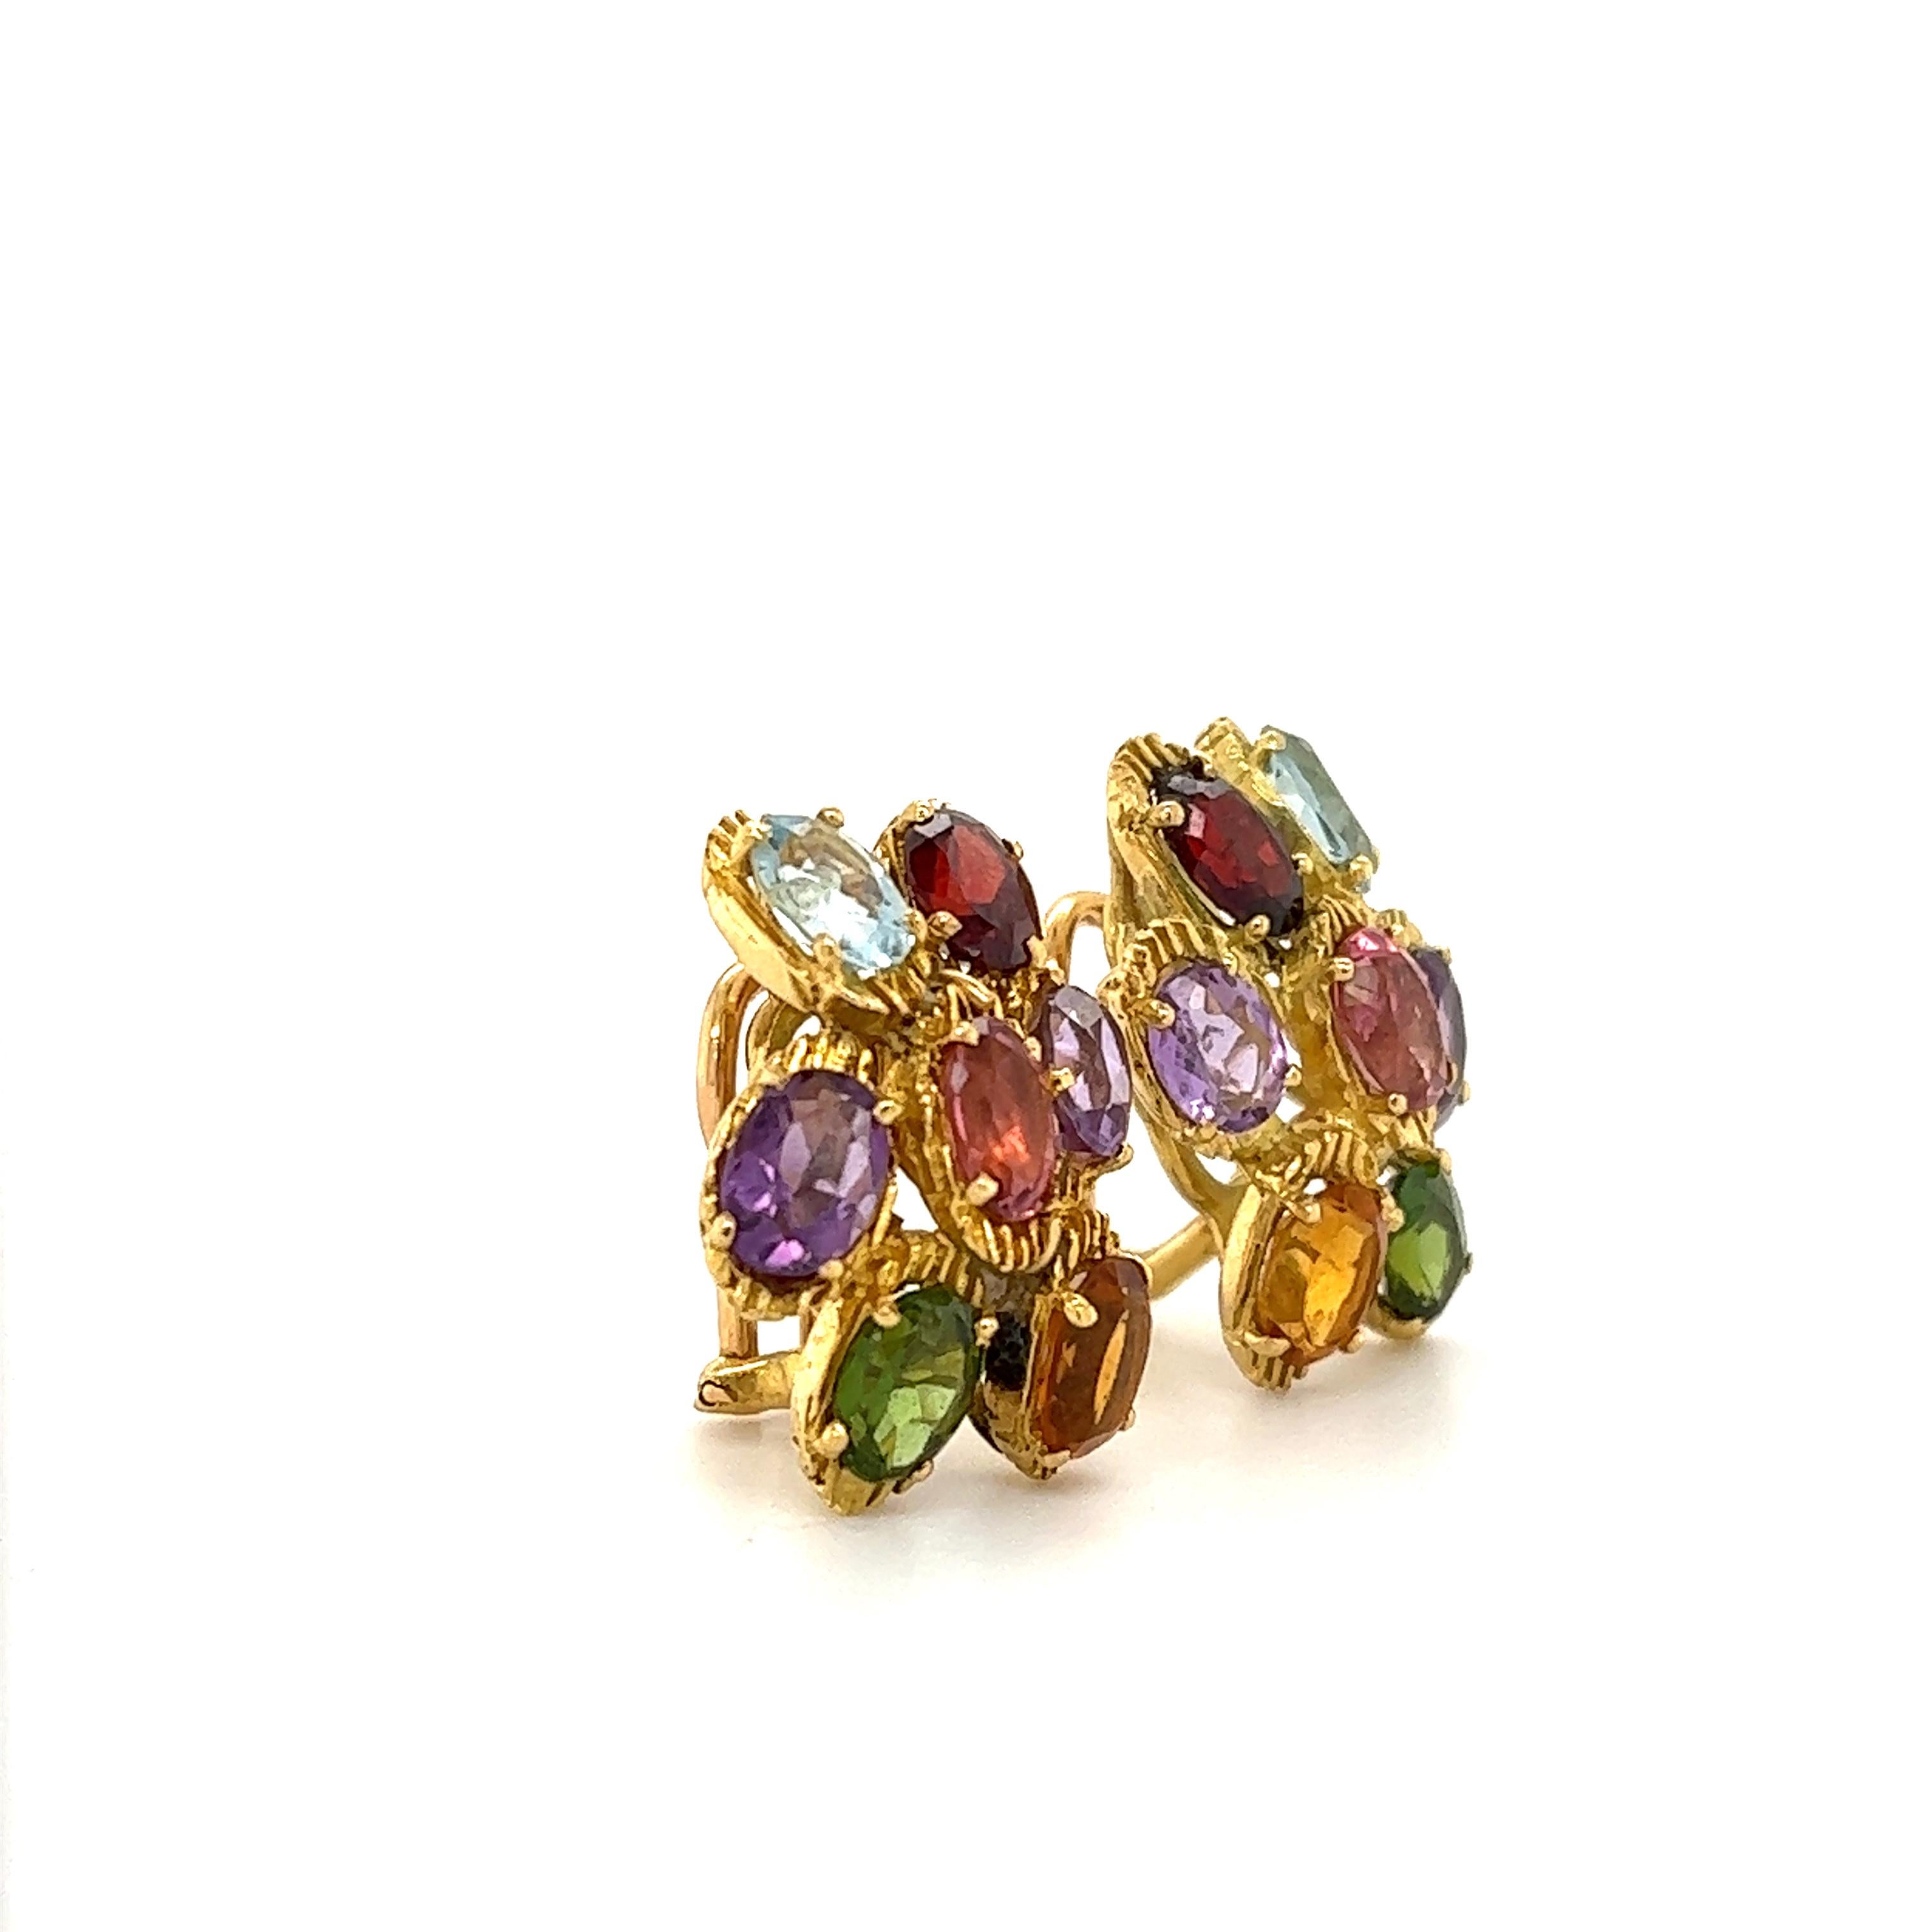 Beautiful pair of earrings crafted by famed designer H. Stern. The pair is set with multi colored gemstones that pop with color and contrast perfectly with 18k yellow gold.  The earrings are set with 14 oval shaped gemstones showing vibrant colors. 